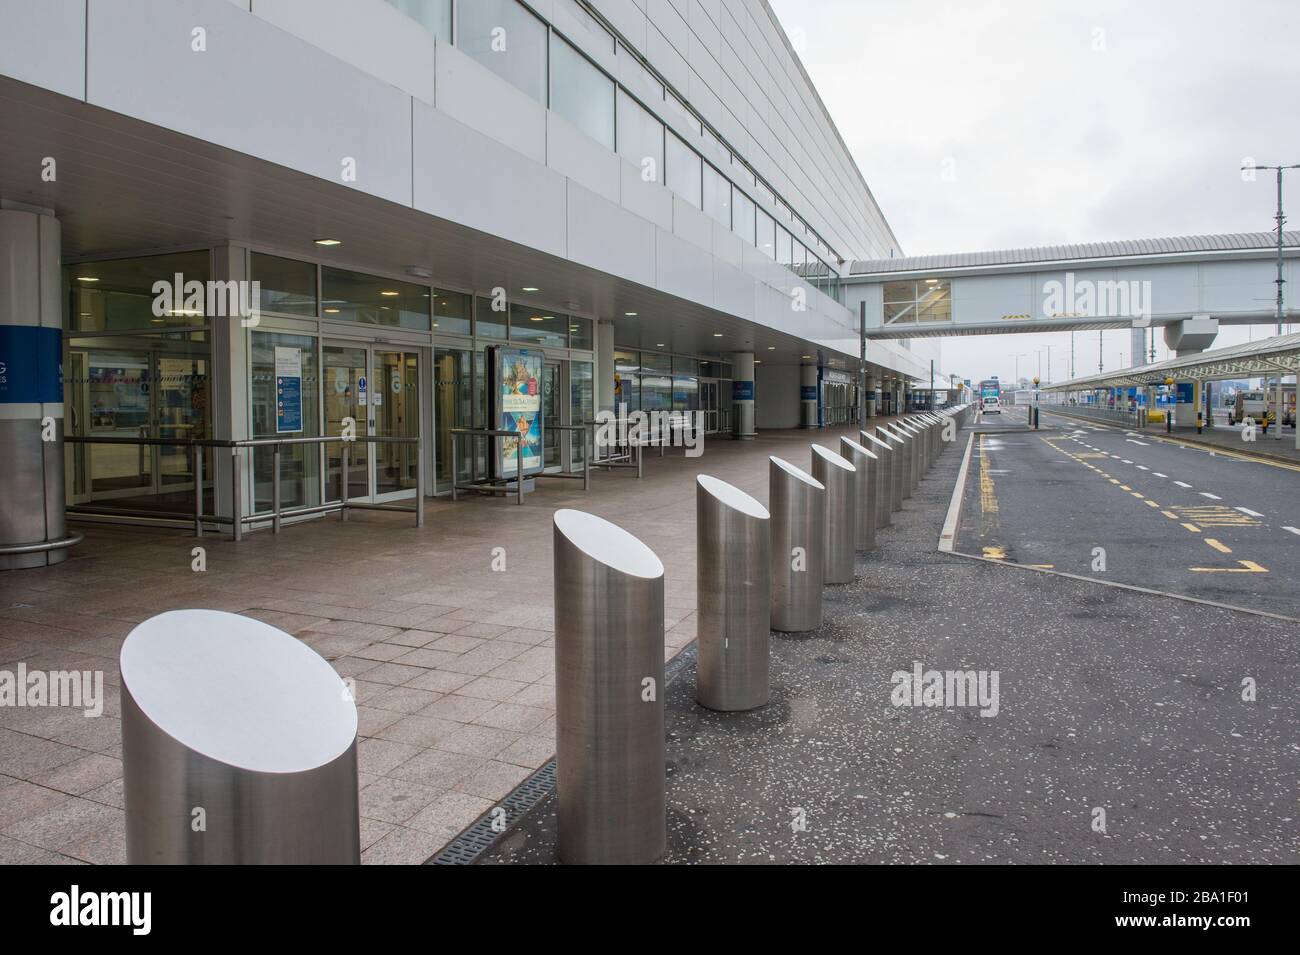 Glasgow, UK. 25th Mar, 2020. Pictured: Views the interior of Glasgow Airport passenger terminal showing the place deserted due to airlines suspending and cancelling flights due to the coronavirus pandemic. Credit: Colin Fisher/Alamy Live News Stock Photo